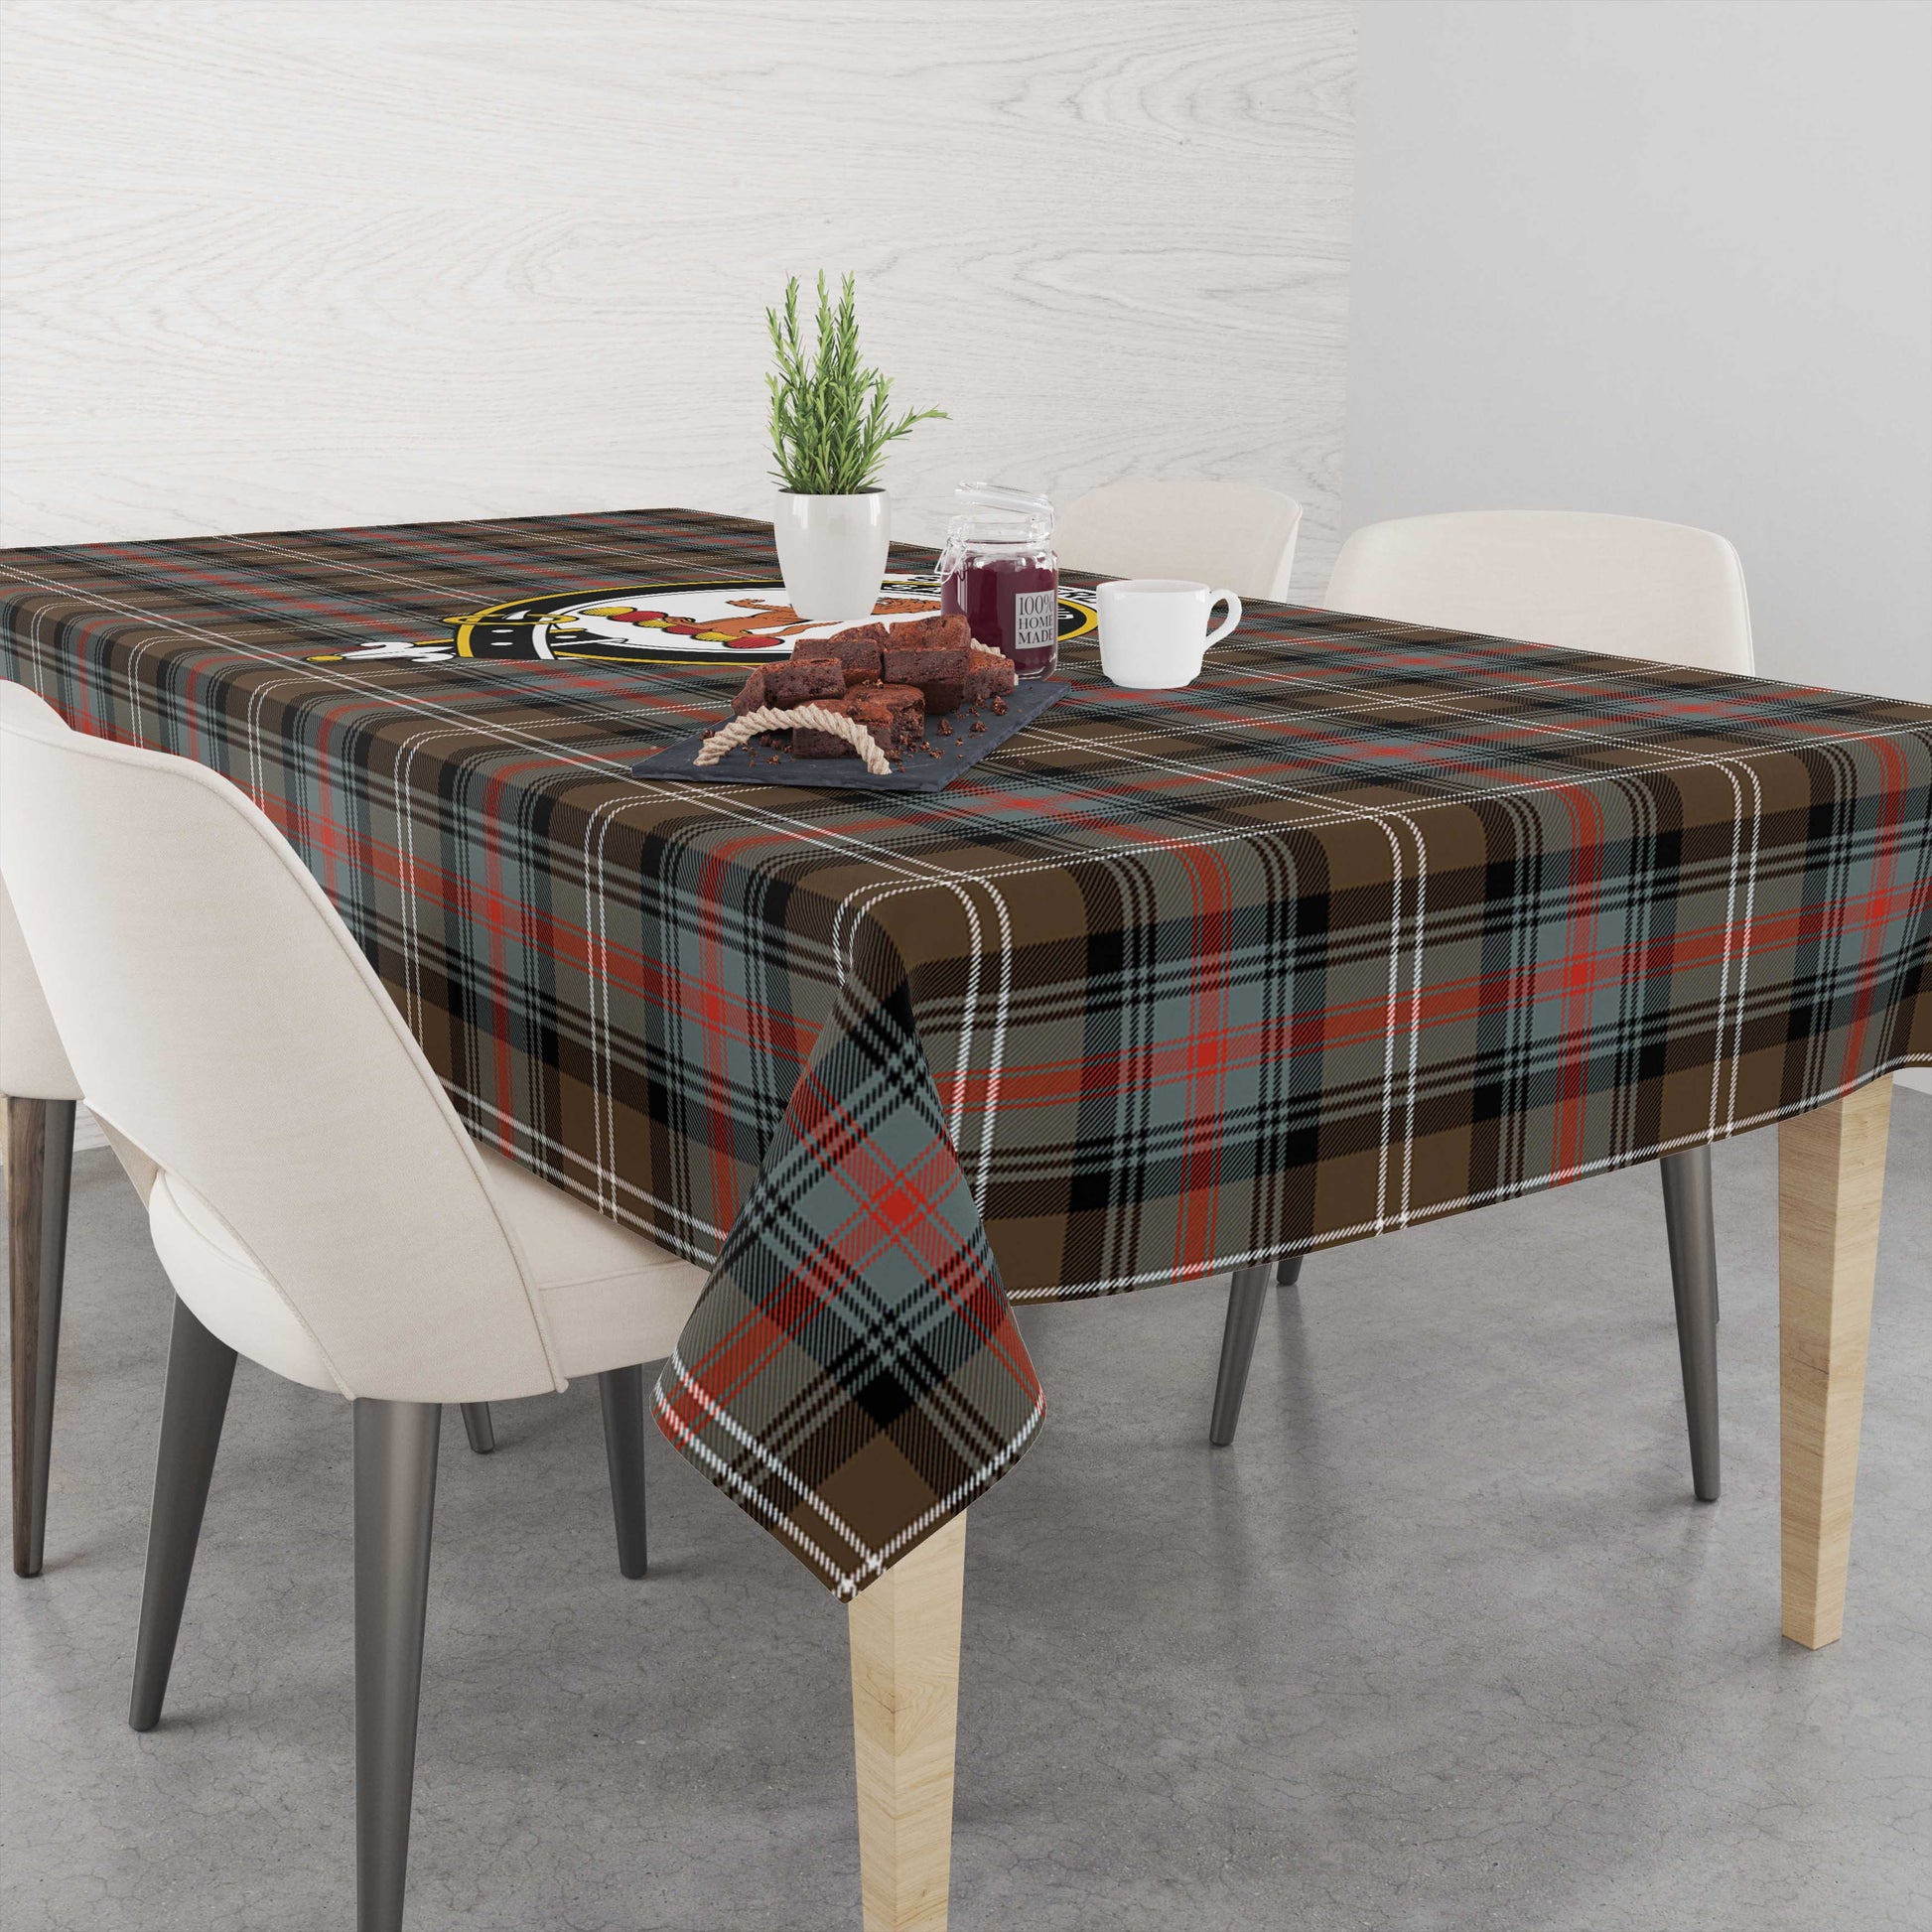 sutherland-weathered-tatan-tablecloth-with-family-crest